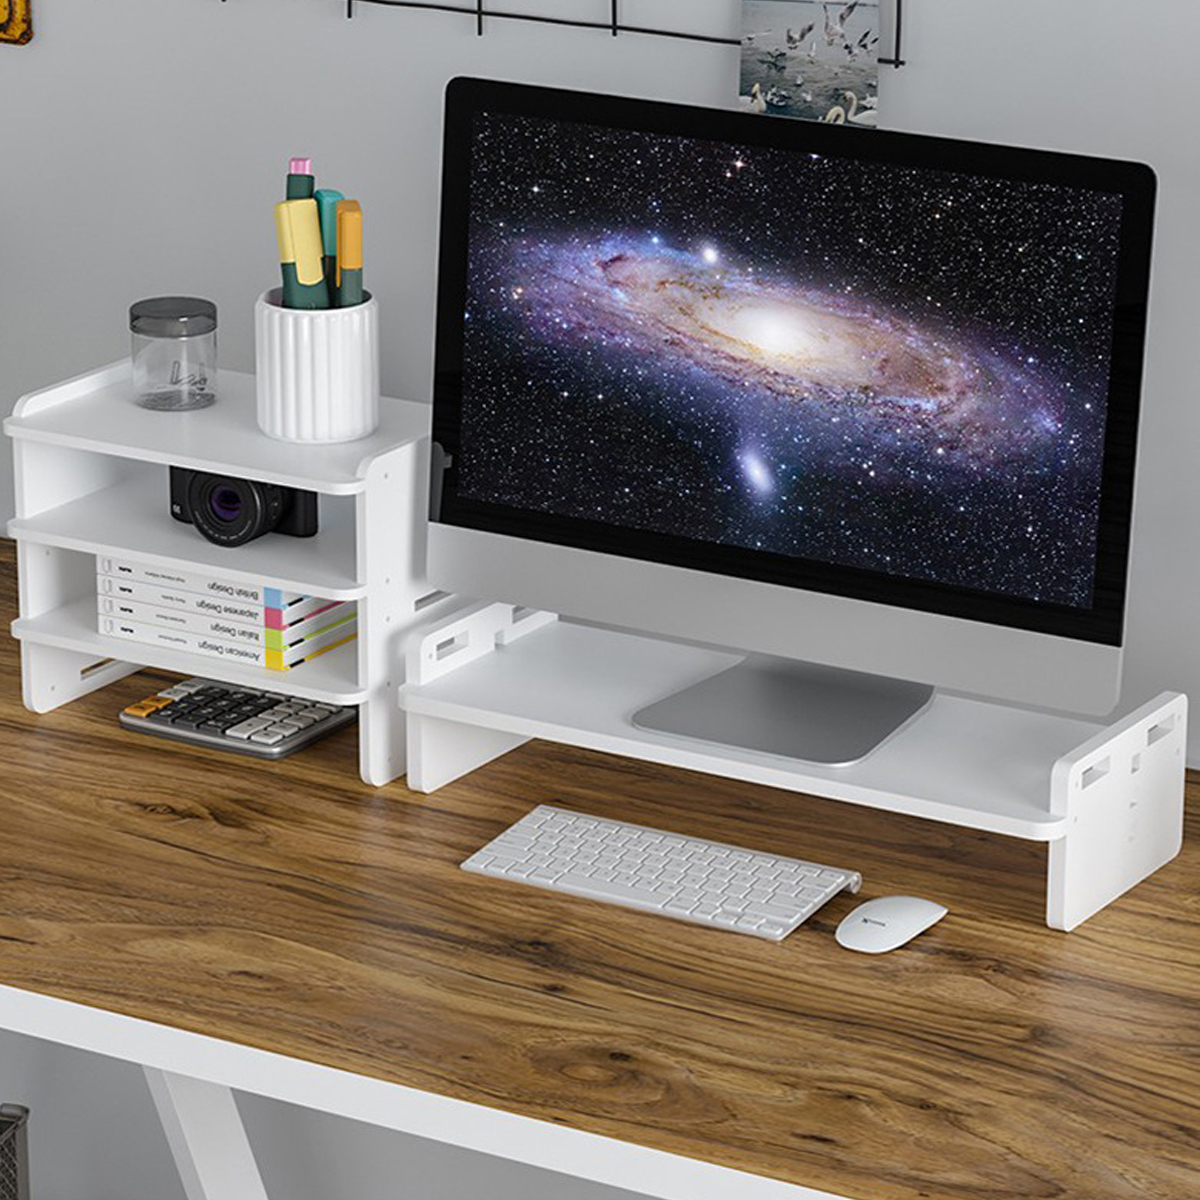 Monitor-Stand-Riser-with-Storage-Organizer-Desktop-Stand-for-Laptop-Computer-Desk-Stand-with-Phone-H-1909309-7